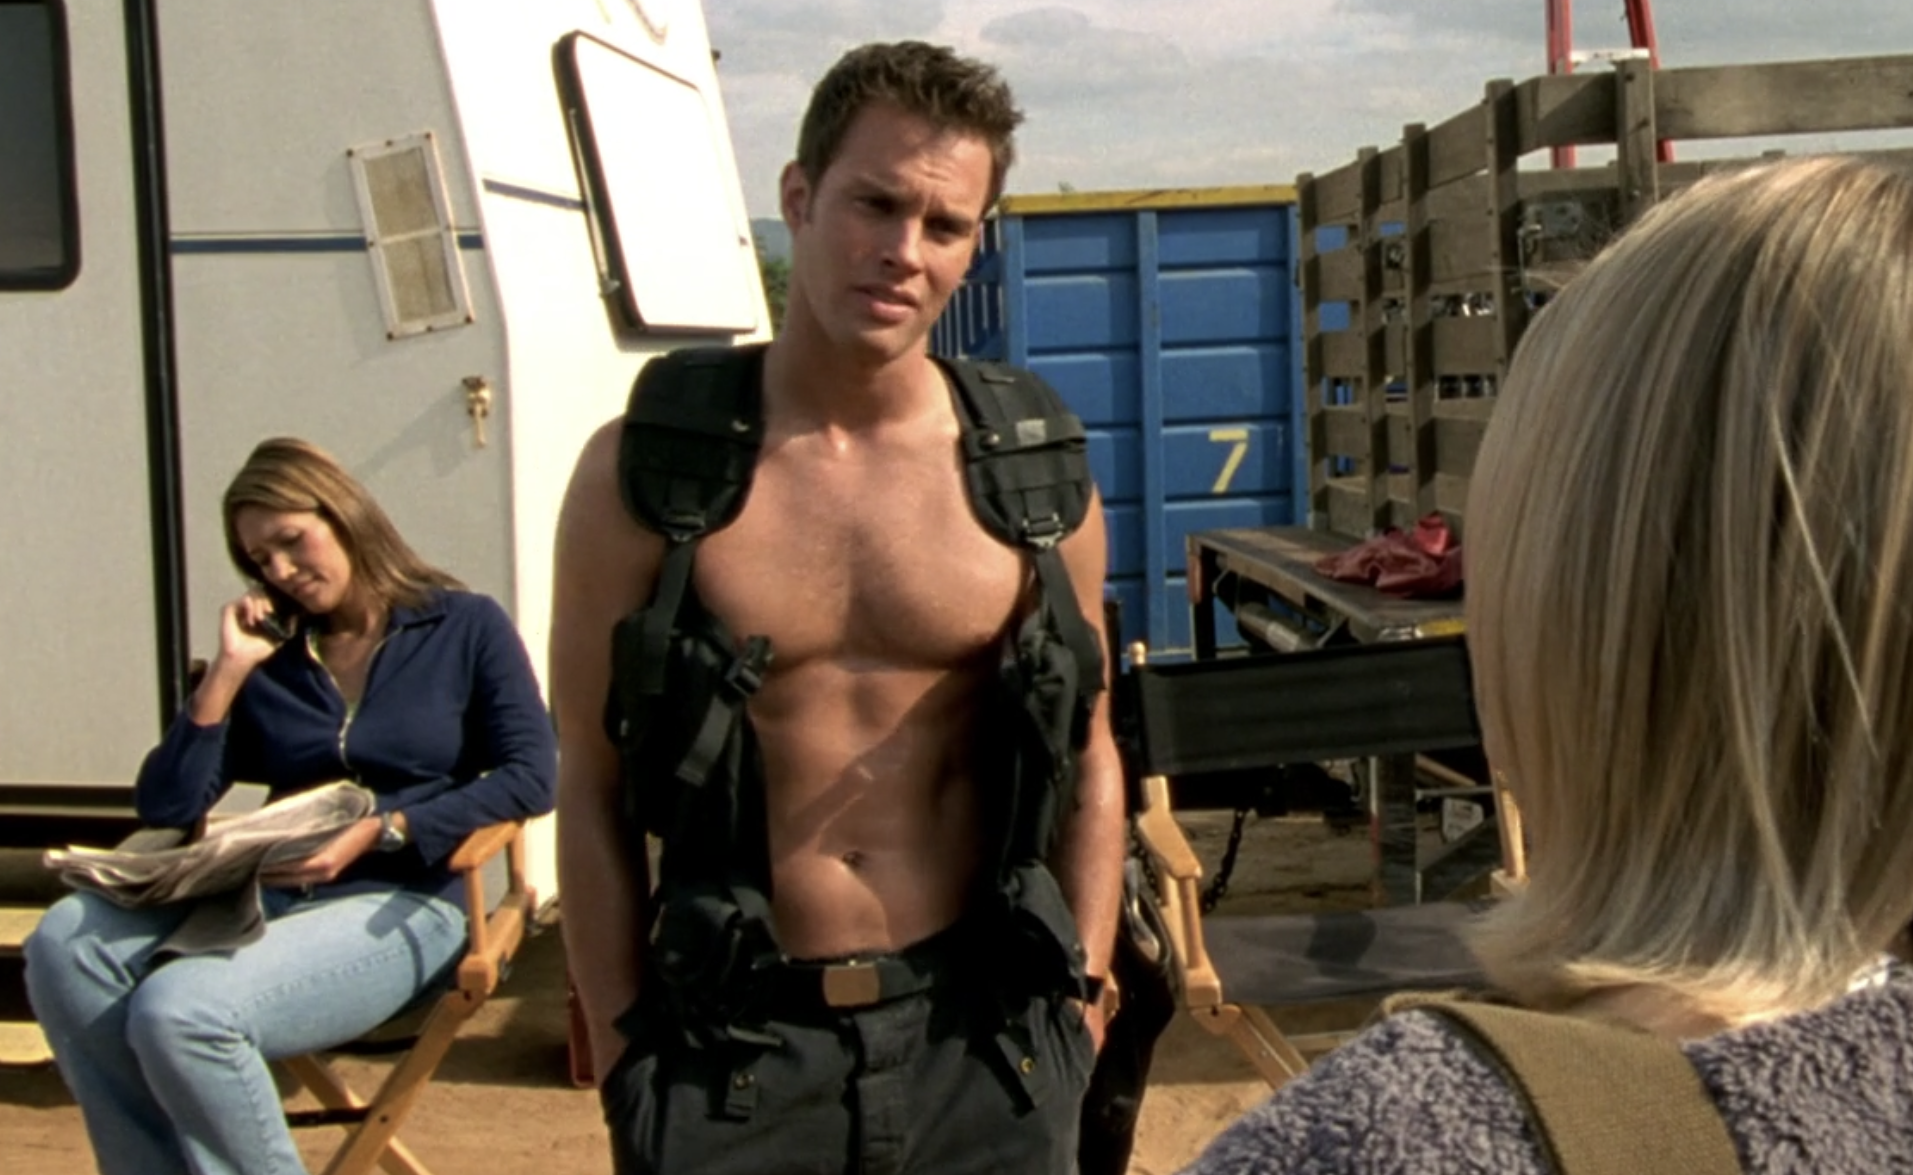 Screenshot from Veronica Mars season one, episode 10. Connor is shirtless and wearing a black tactical vest. He's on a movie set looking at Veronica who faces away from the camera.